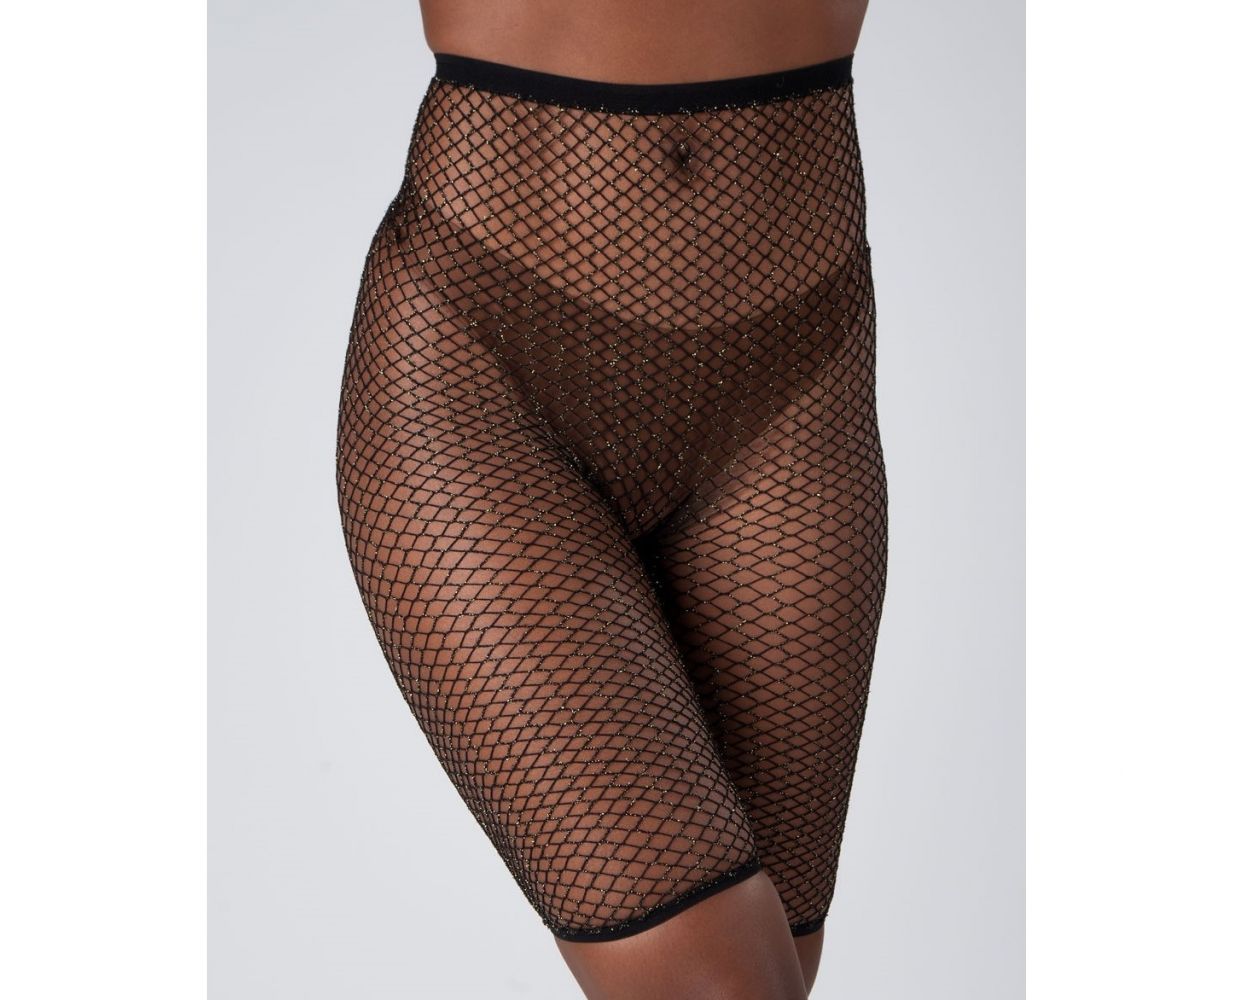 Matched For Me - Micles Carnival Tights® now has Glitter fishnet